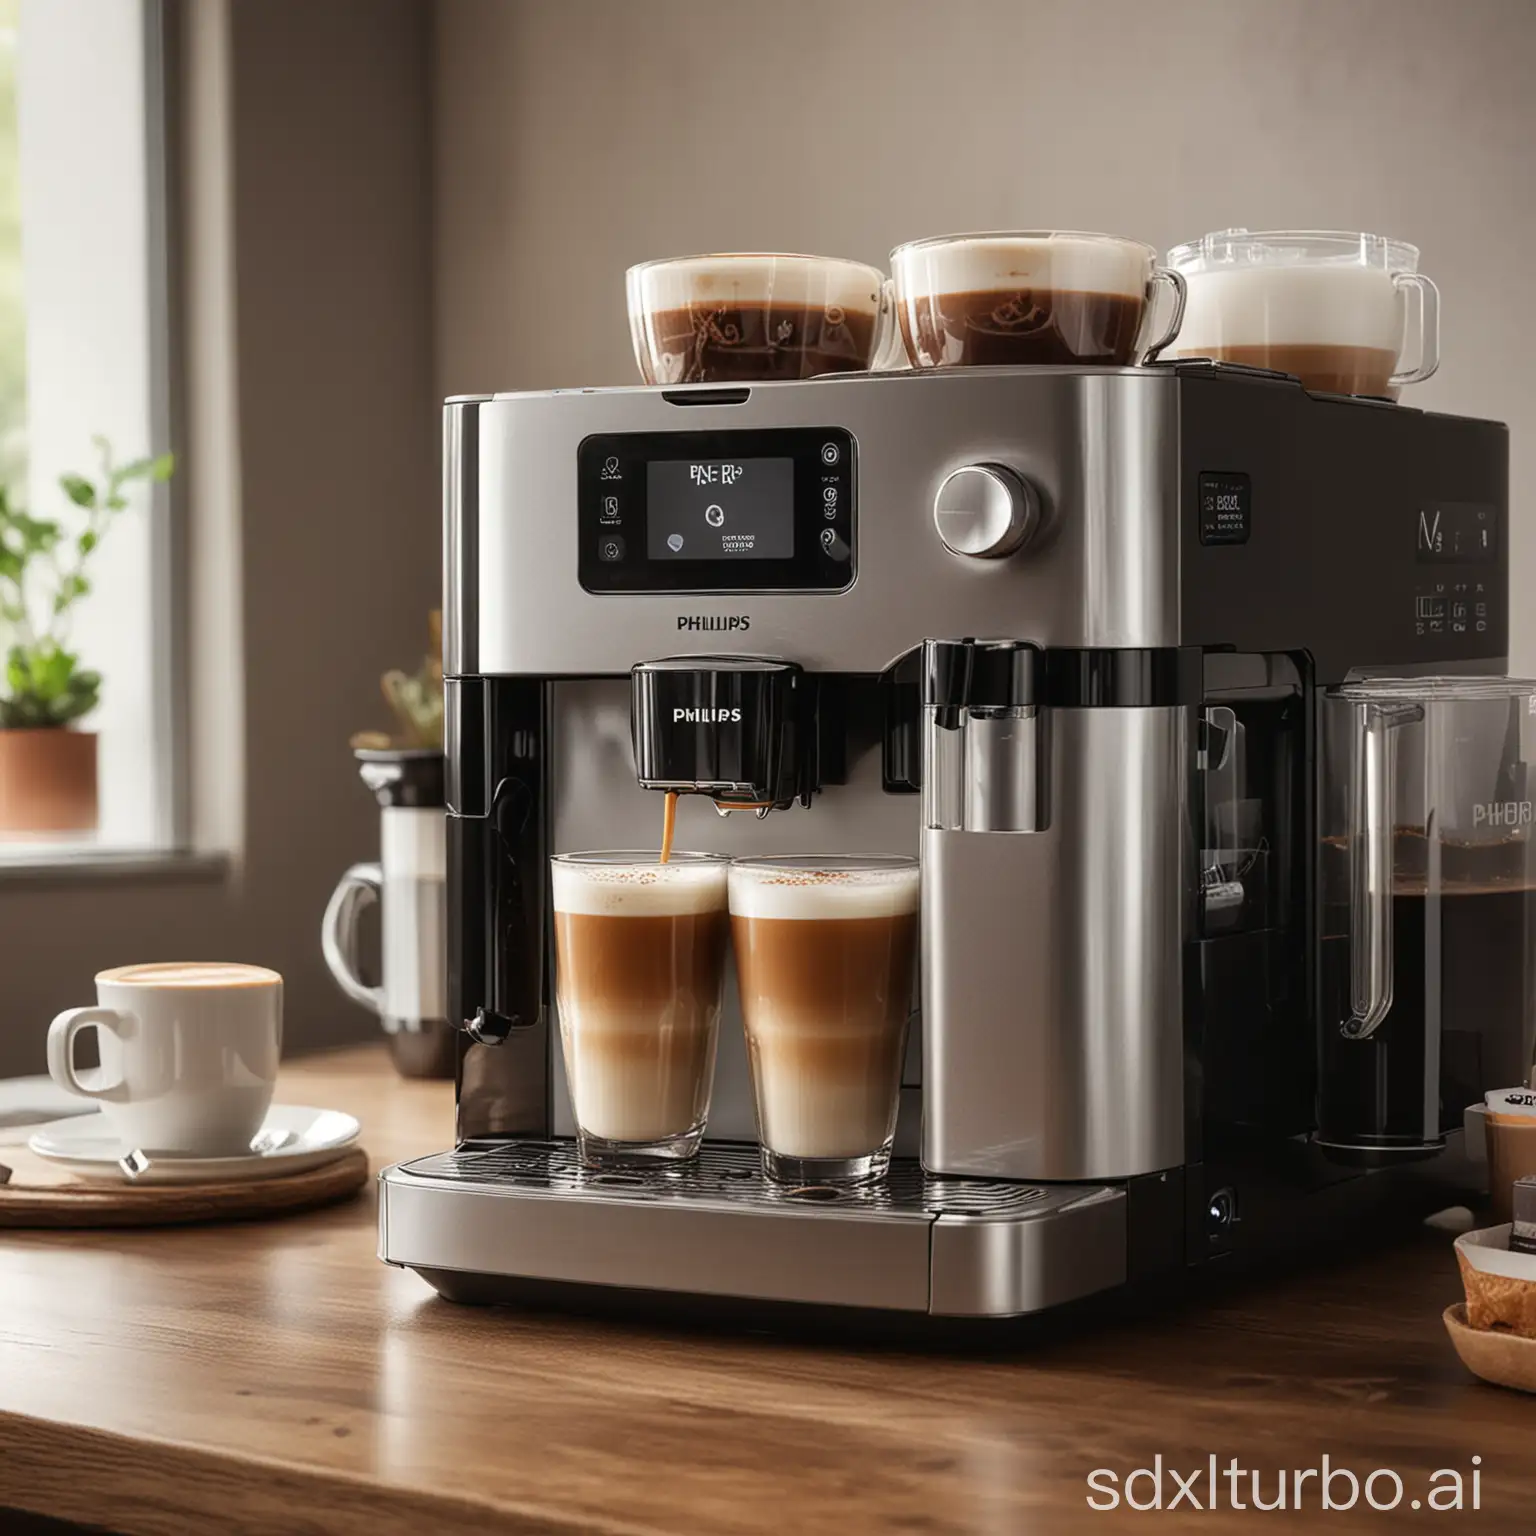 Enjoying-a-Sophisticated-Coffee-Experience-with-Philips-Automatic-Coffee-Machine